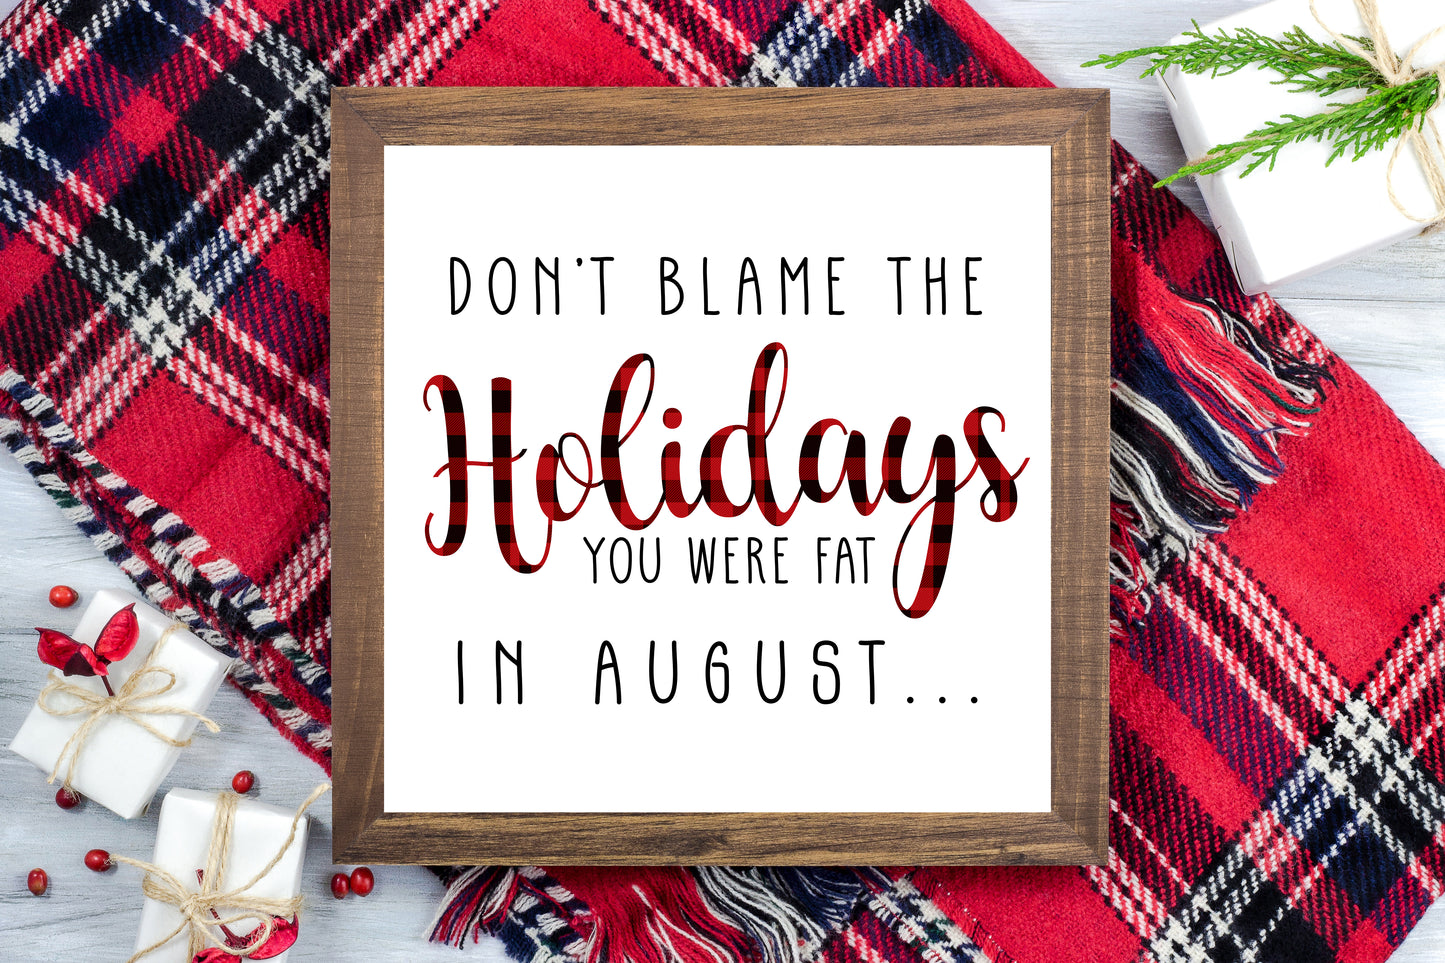 Don't blame the holidays you were fat in August - Funny Christmas Printable Sign Farmhouse Style  - Digital File